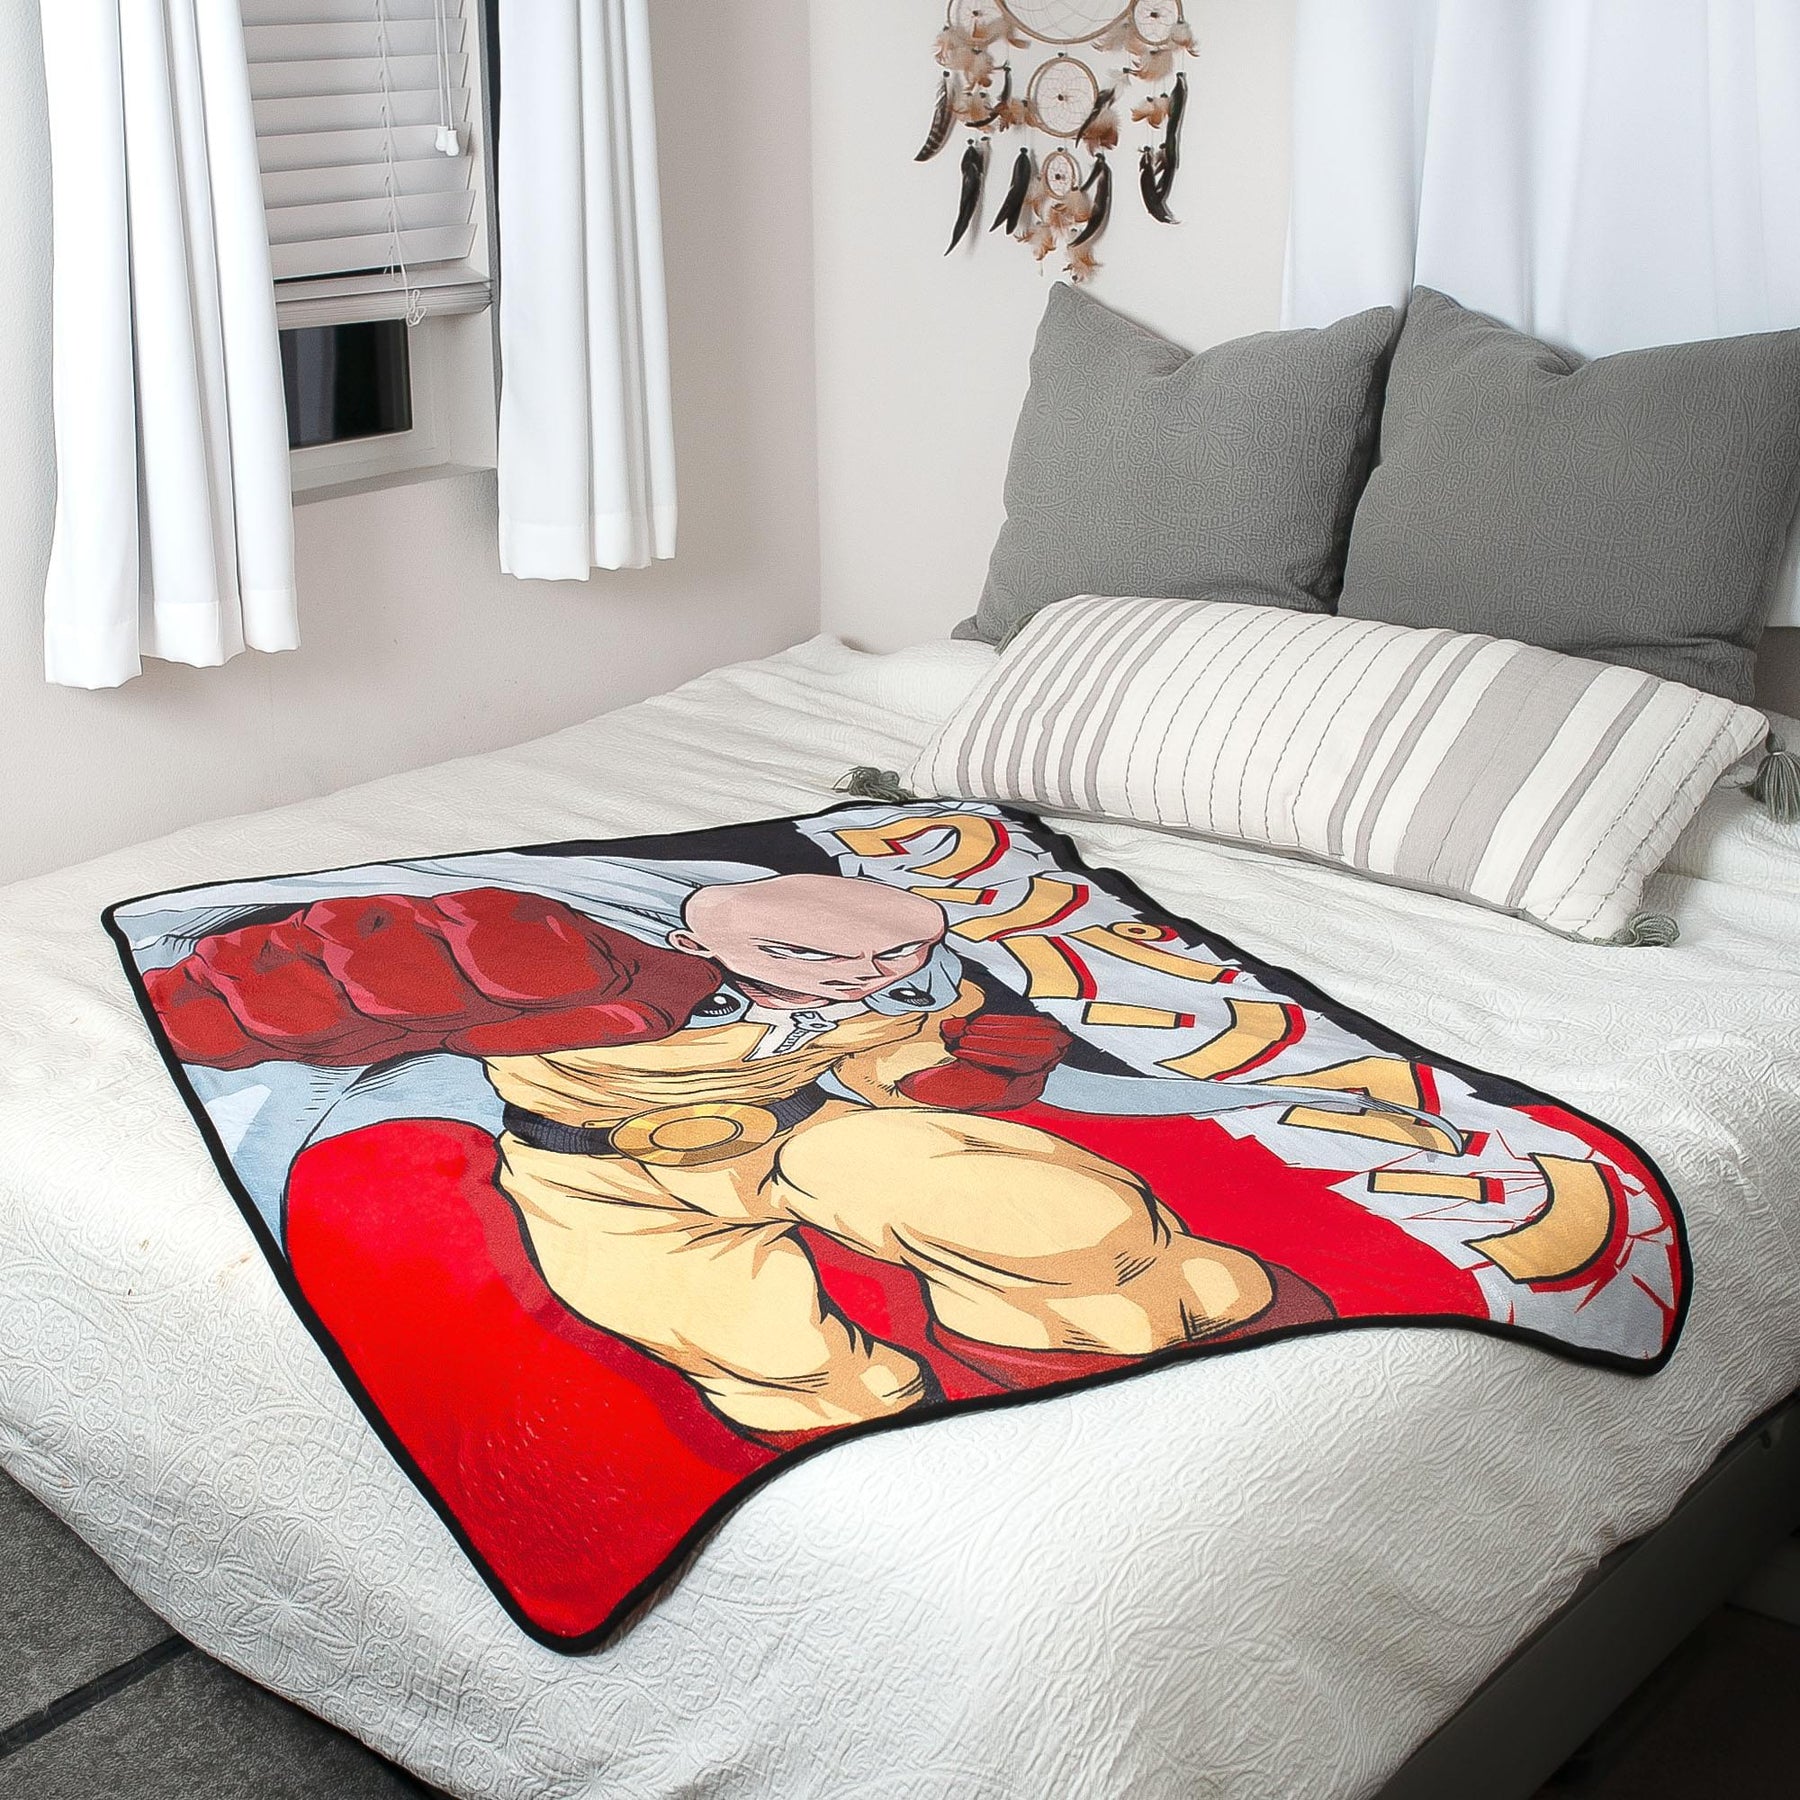 One-Punch Man Fleece Throw Blanket | 45 x 60 Inches